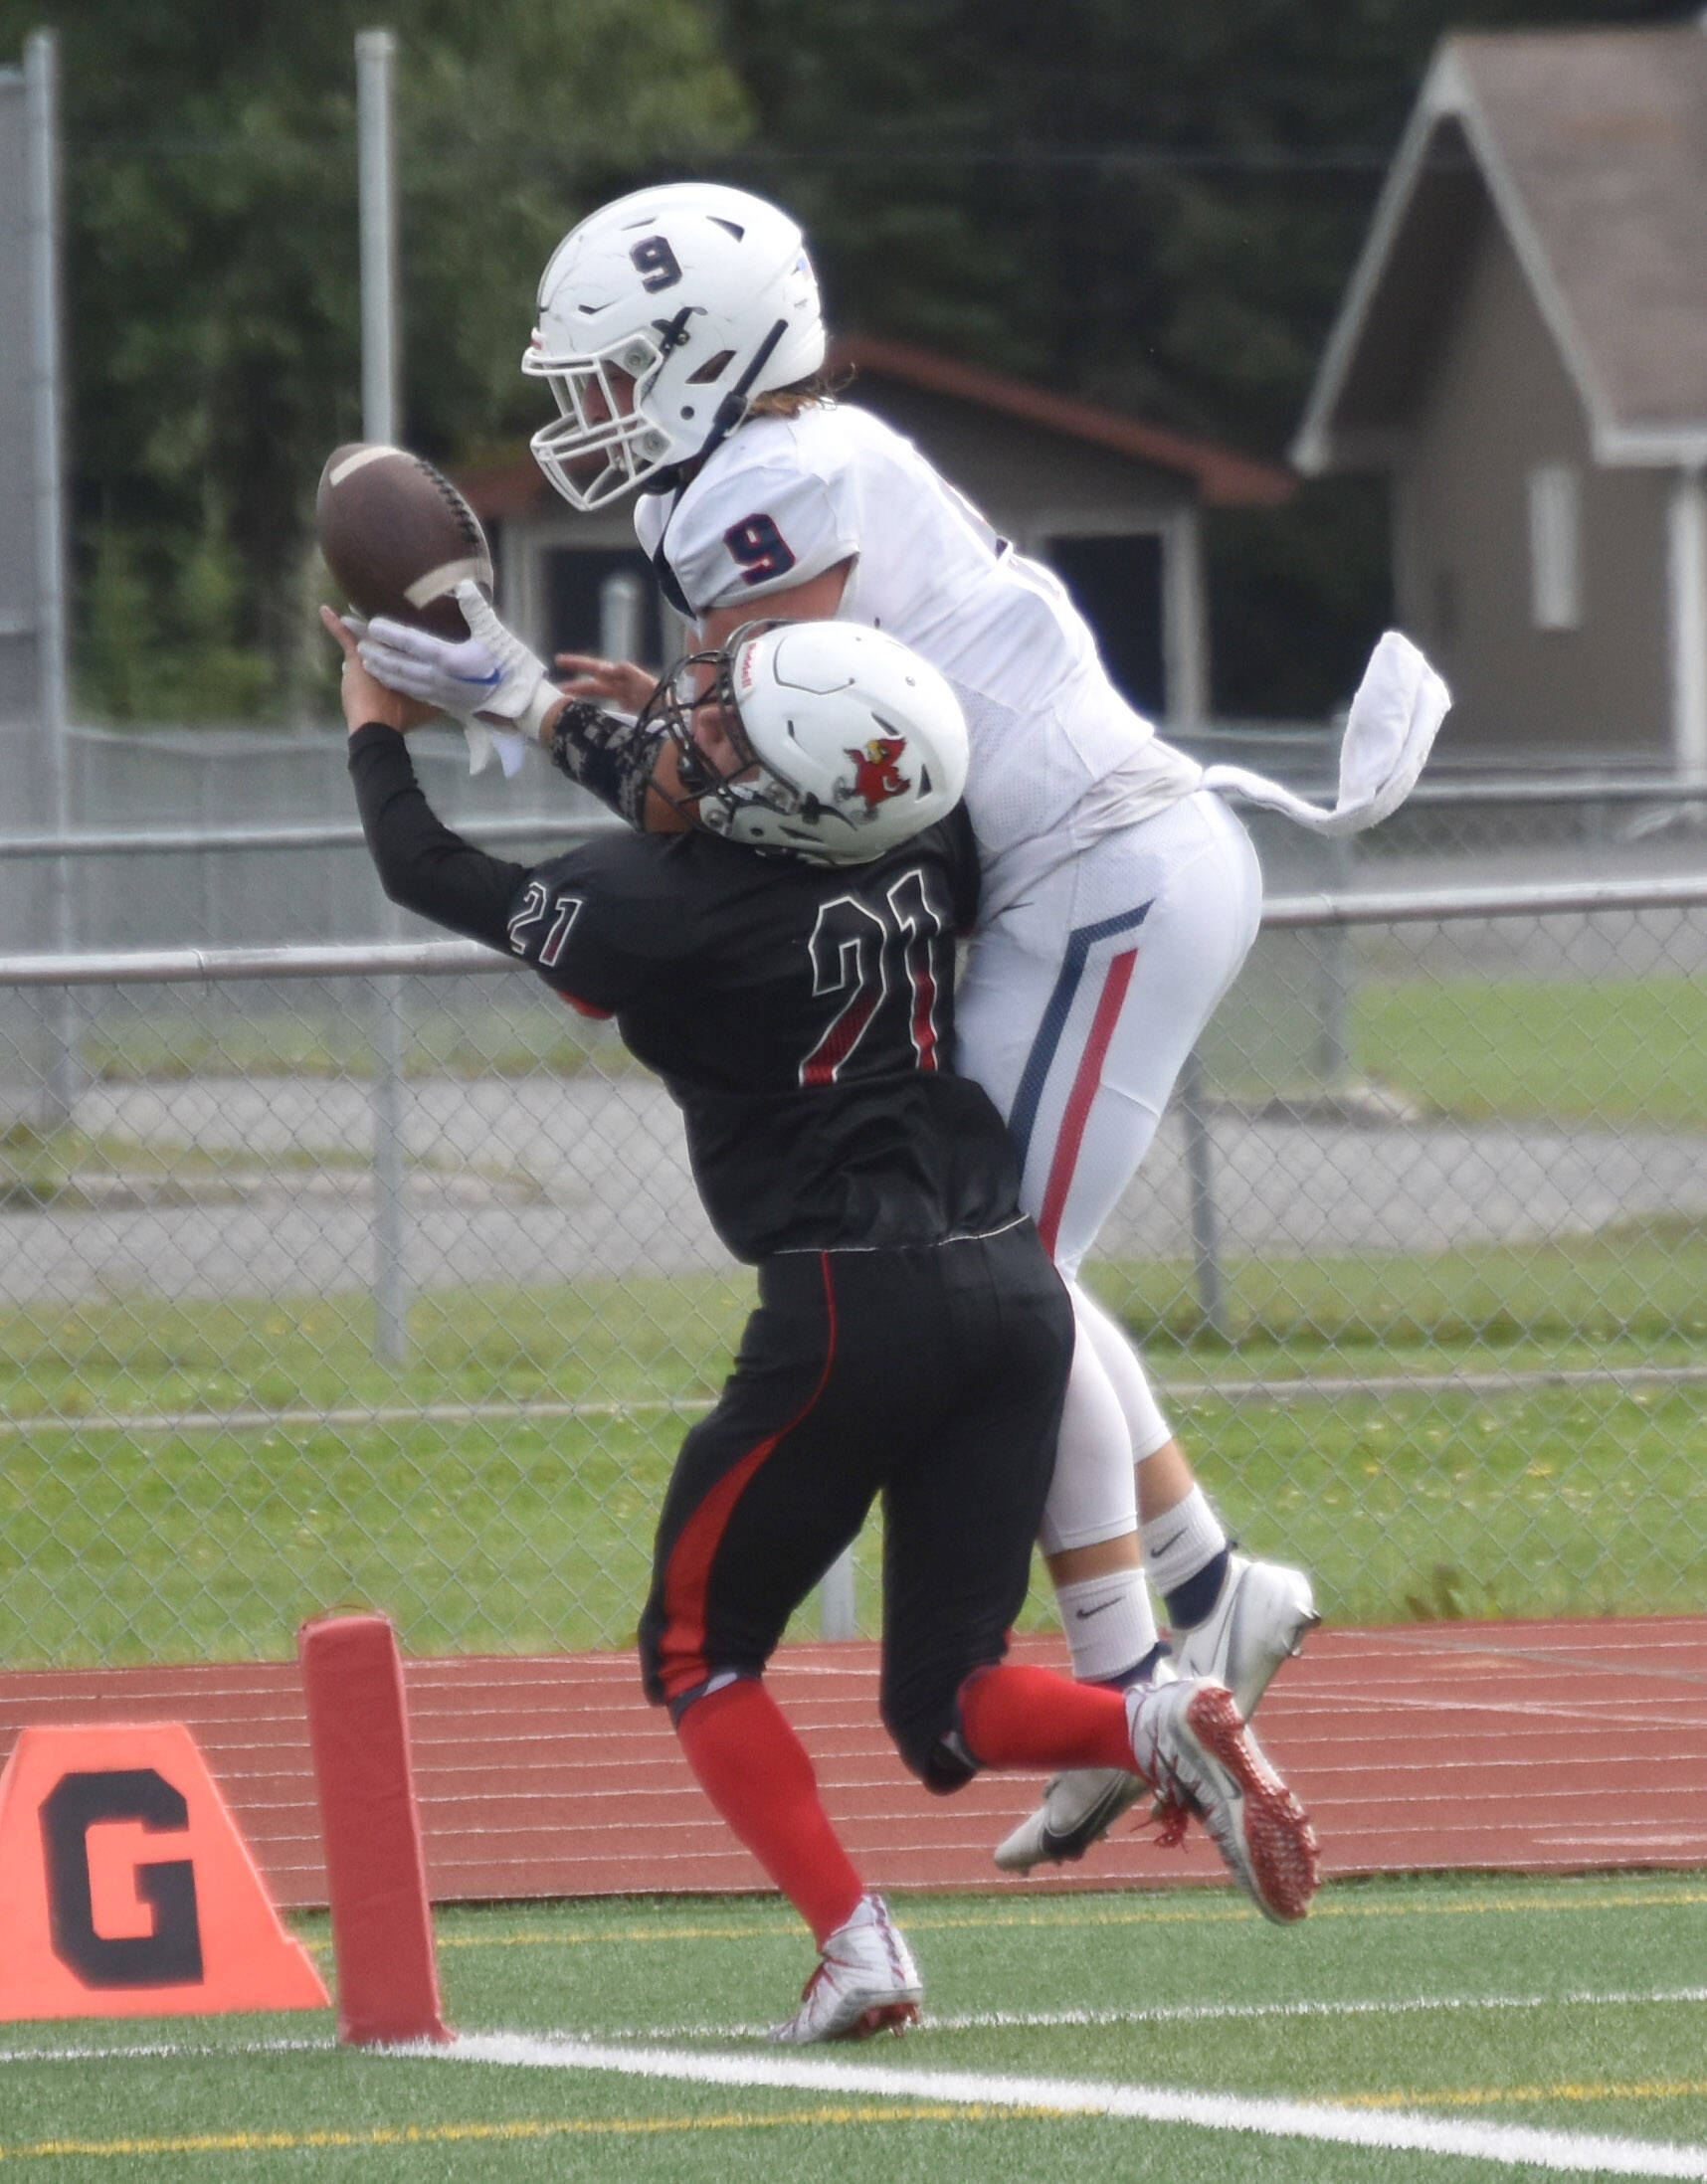 Kenai Central’s Owen Whicker breaks up a pass intended for North Pole’s Gabe Hollett on Saturday, Aug. 20, 2022, at Ed Hollier Field at Kenai Central High School in Kenai, Alaska. (Photo by Jeff Helminiak/Peninsula Clarion)